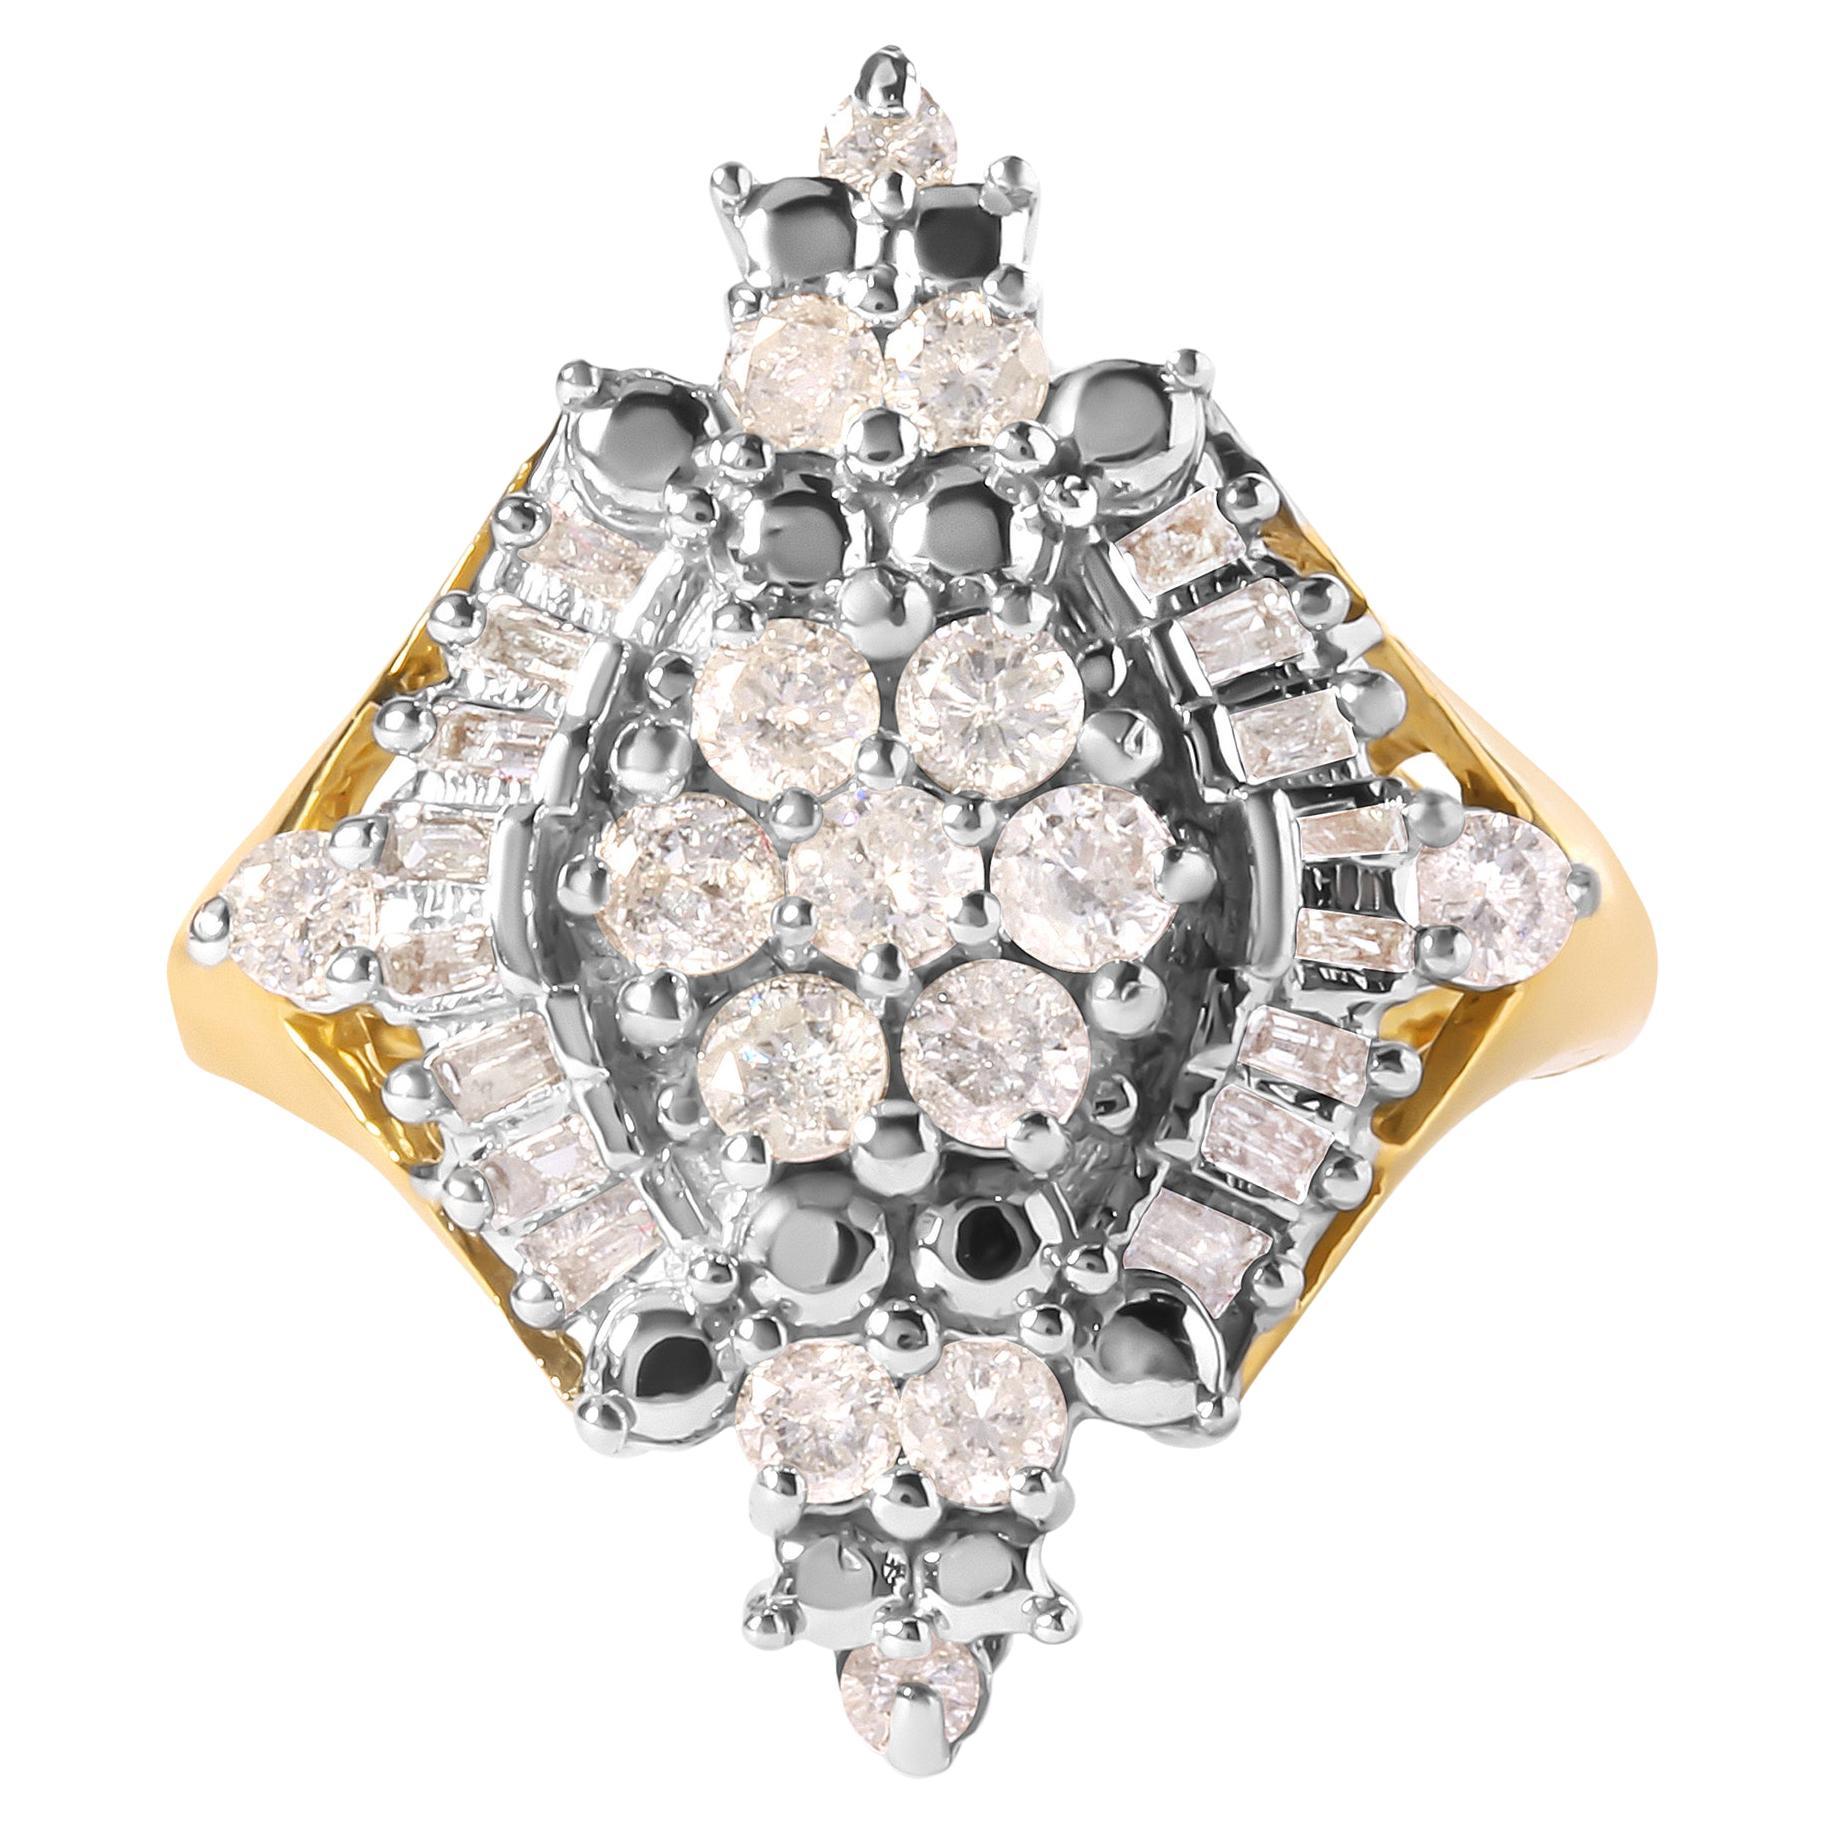 10K Yellow Gold 1.0 Carat Diamond Cluster and Rhombus Halo Ring For Sale